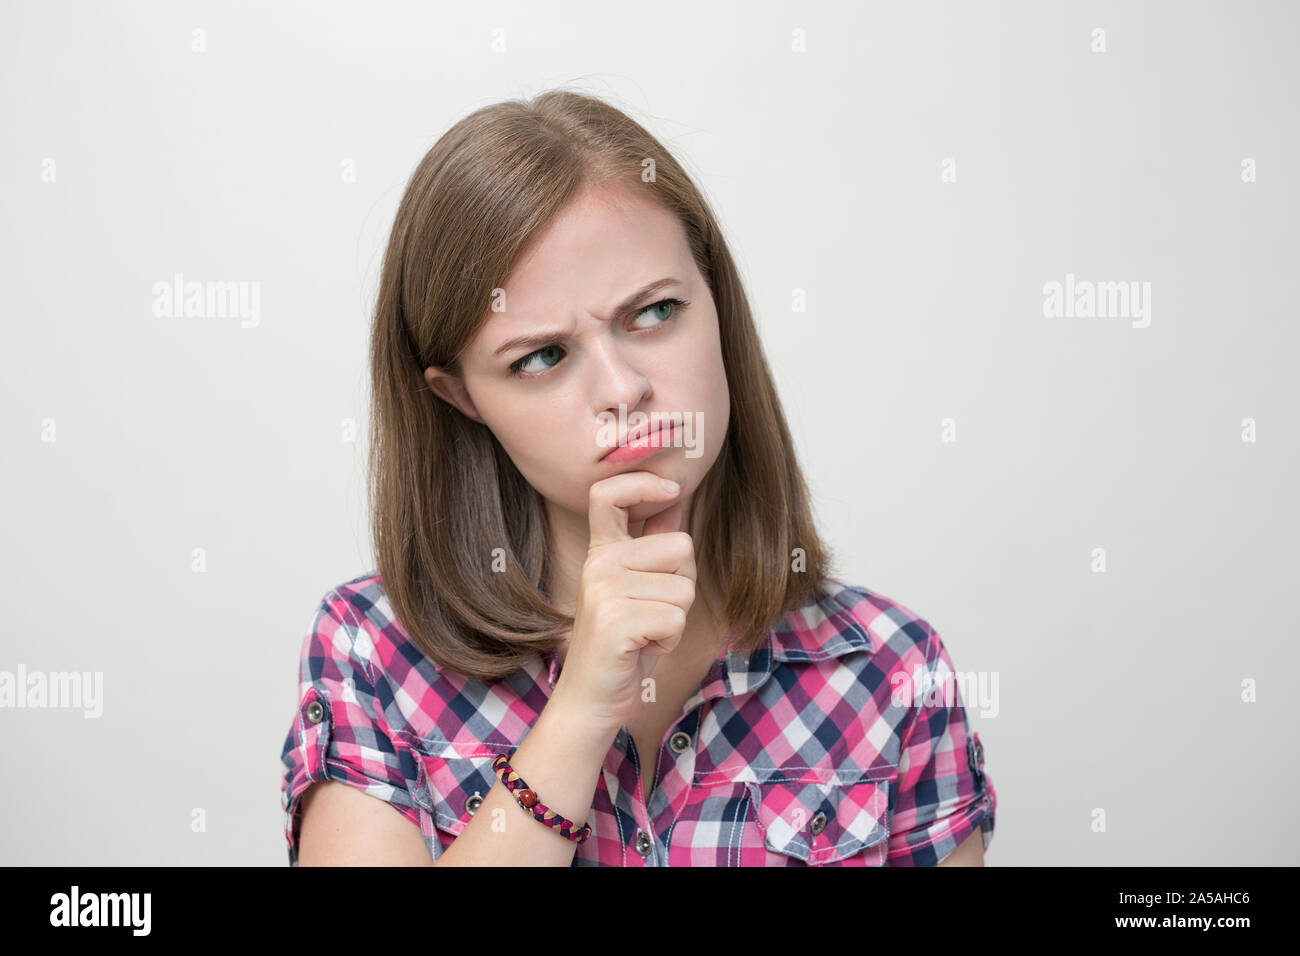 Young caucasian woman girl with questioning, puzzled, confused expression, thinking or remembering something Stock Photo